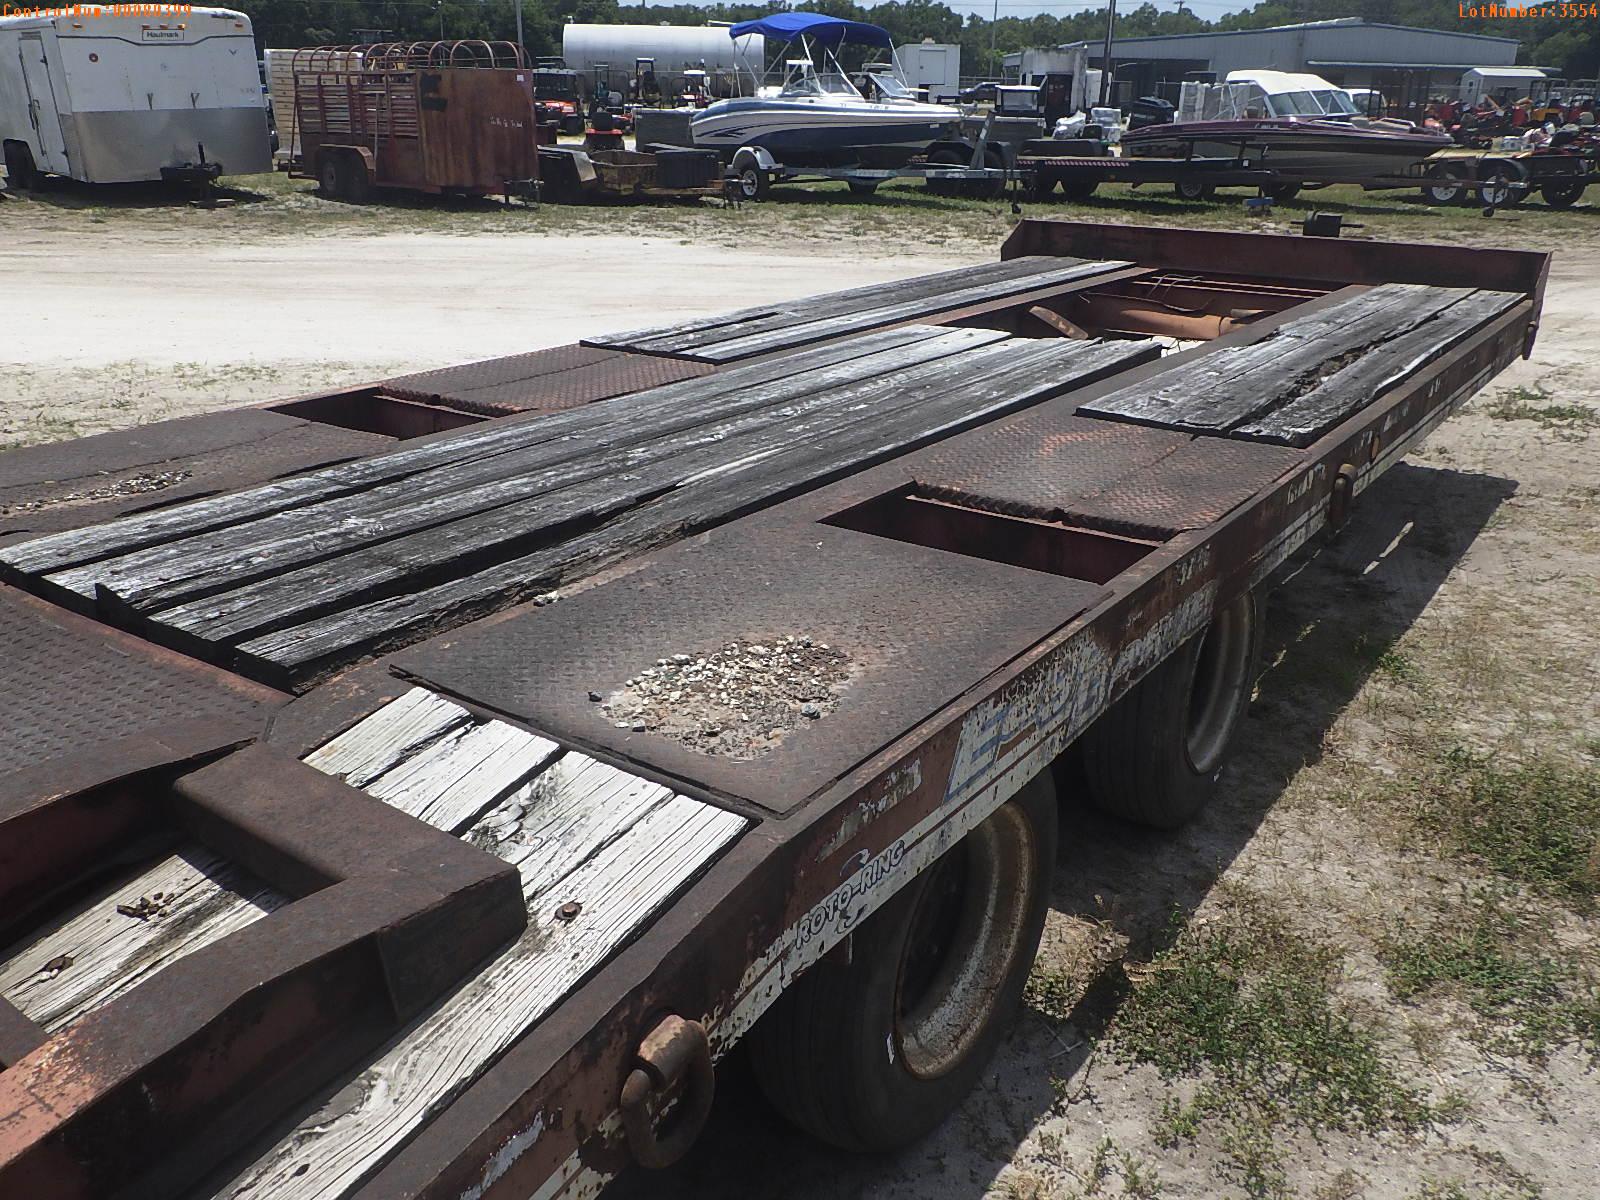 5-03554 (Trailers-Equipment)  Seller:Private/Dealer 2002 EAGB TOWBEHIND